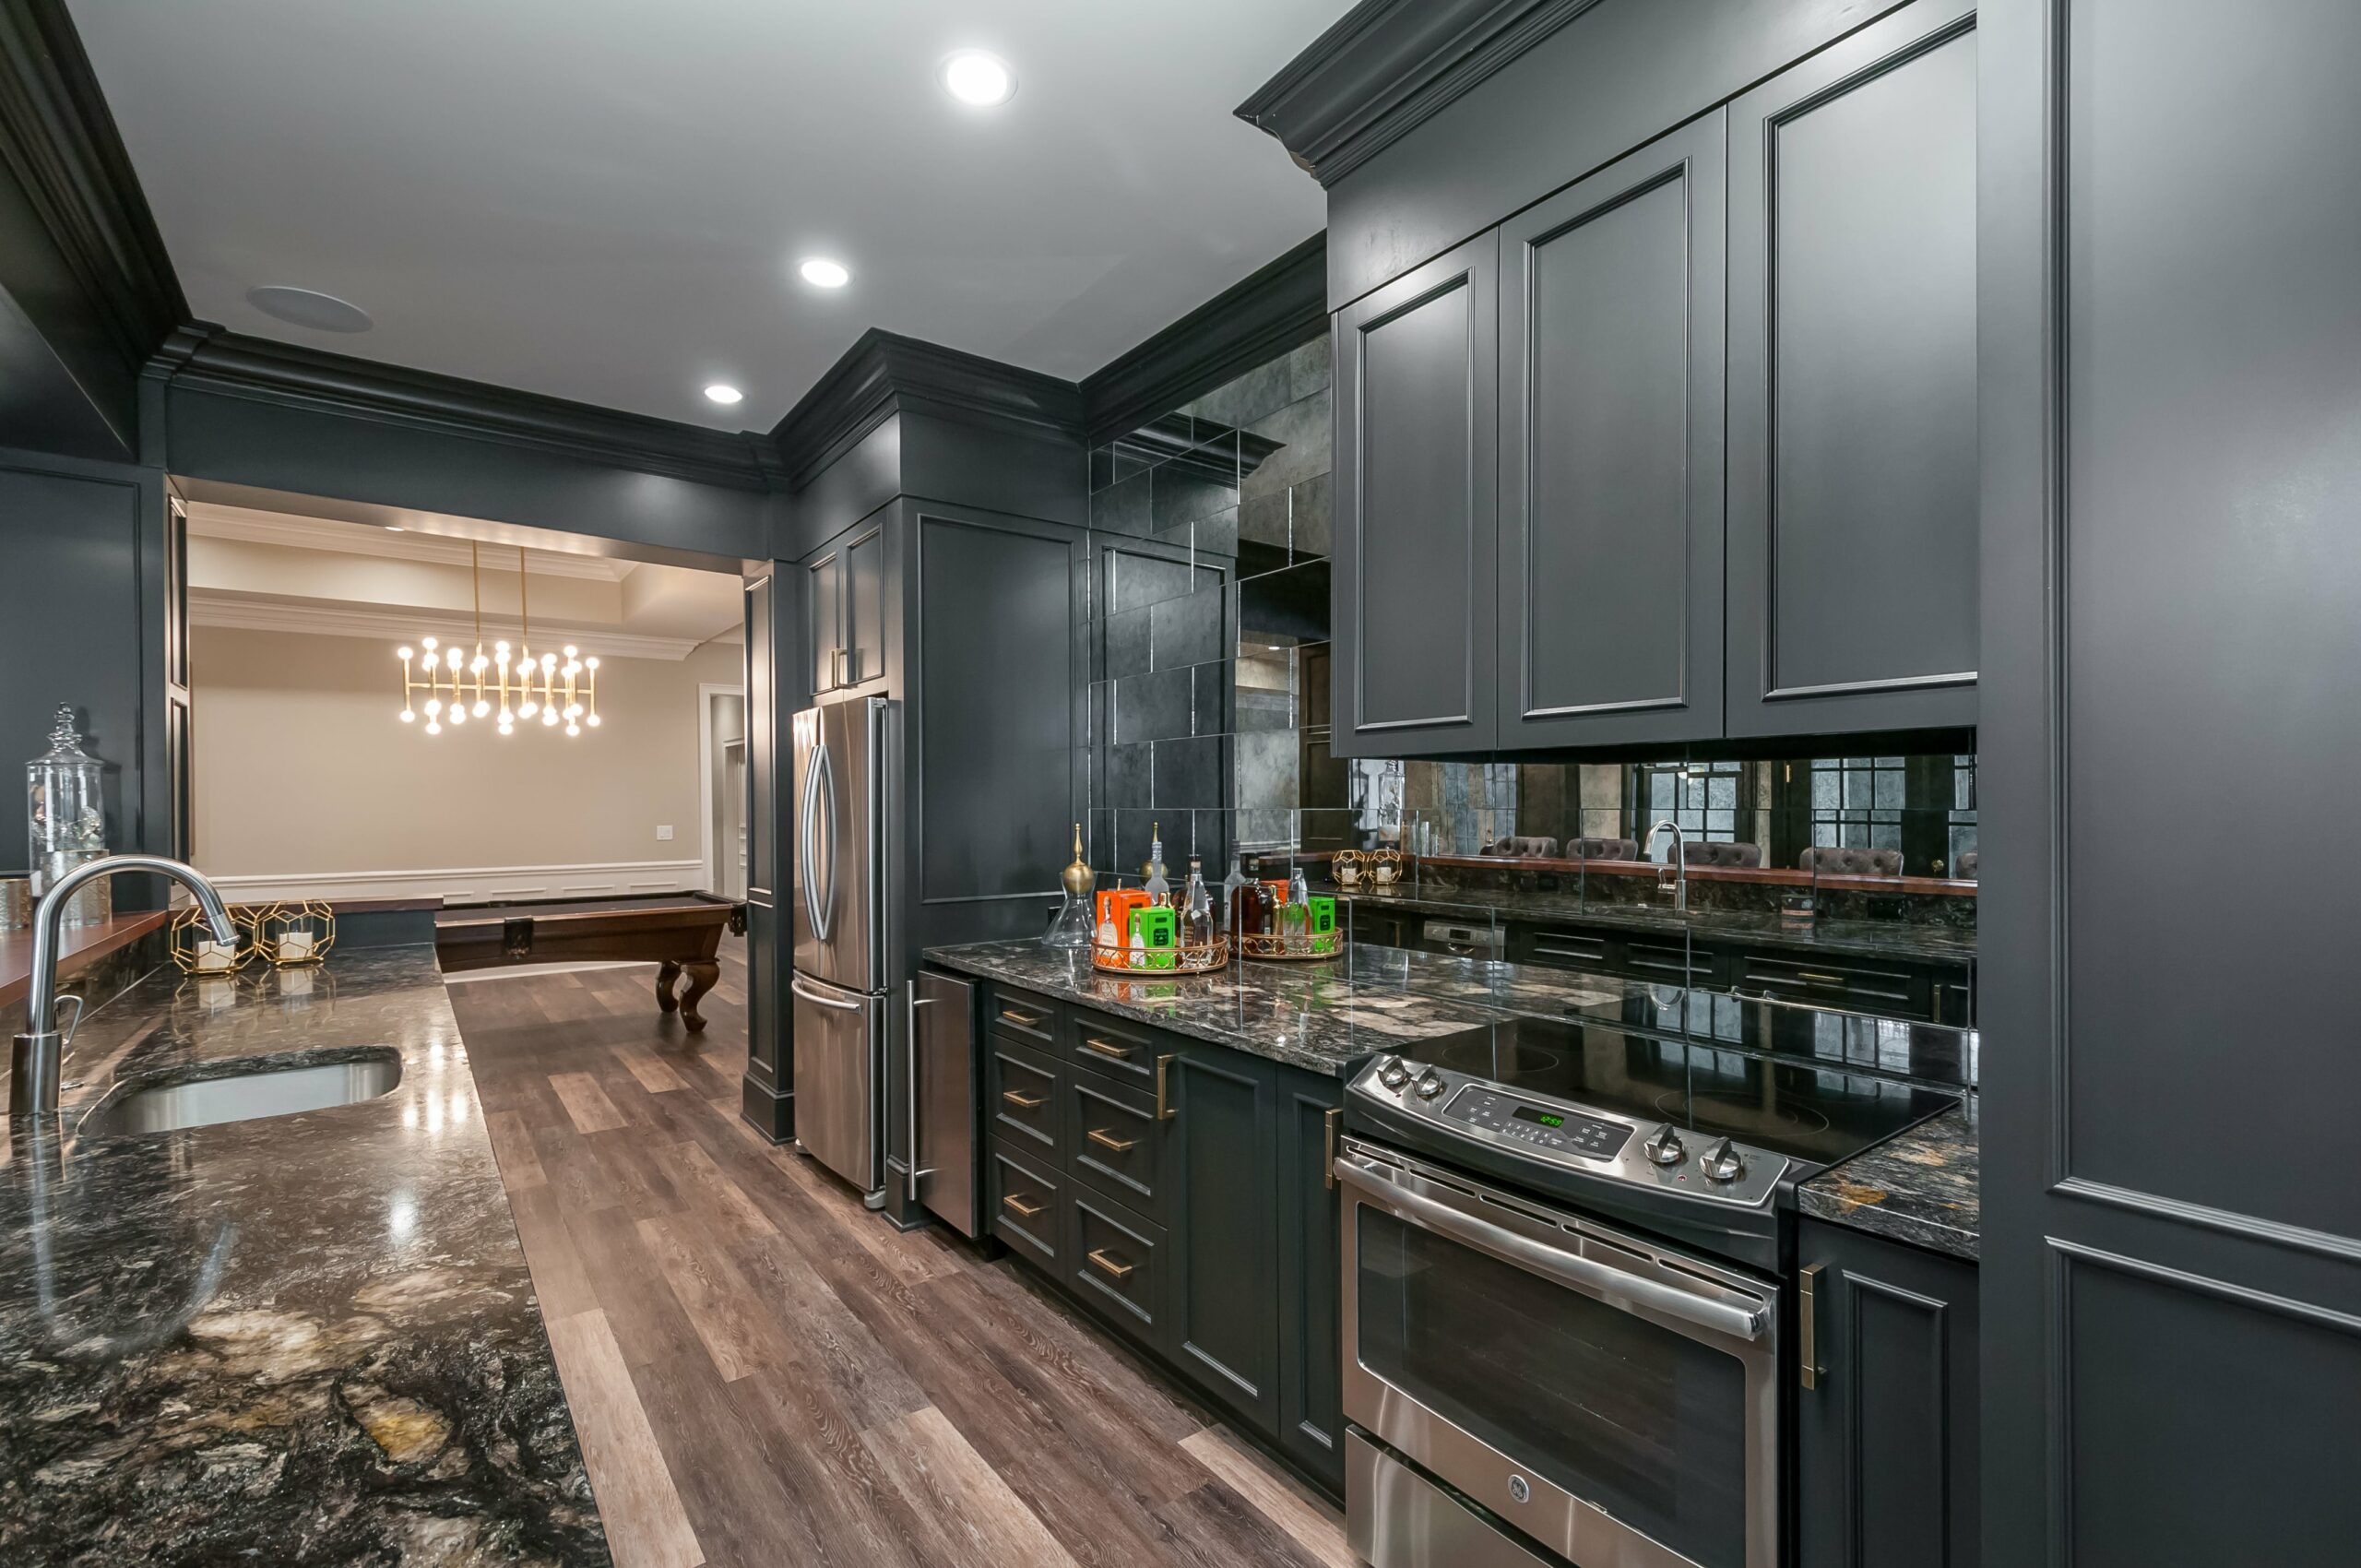 Basement kitchen remodel with dark cabinets and countertops